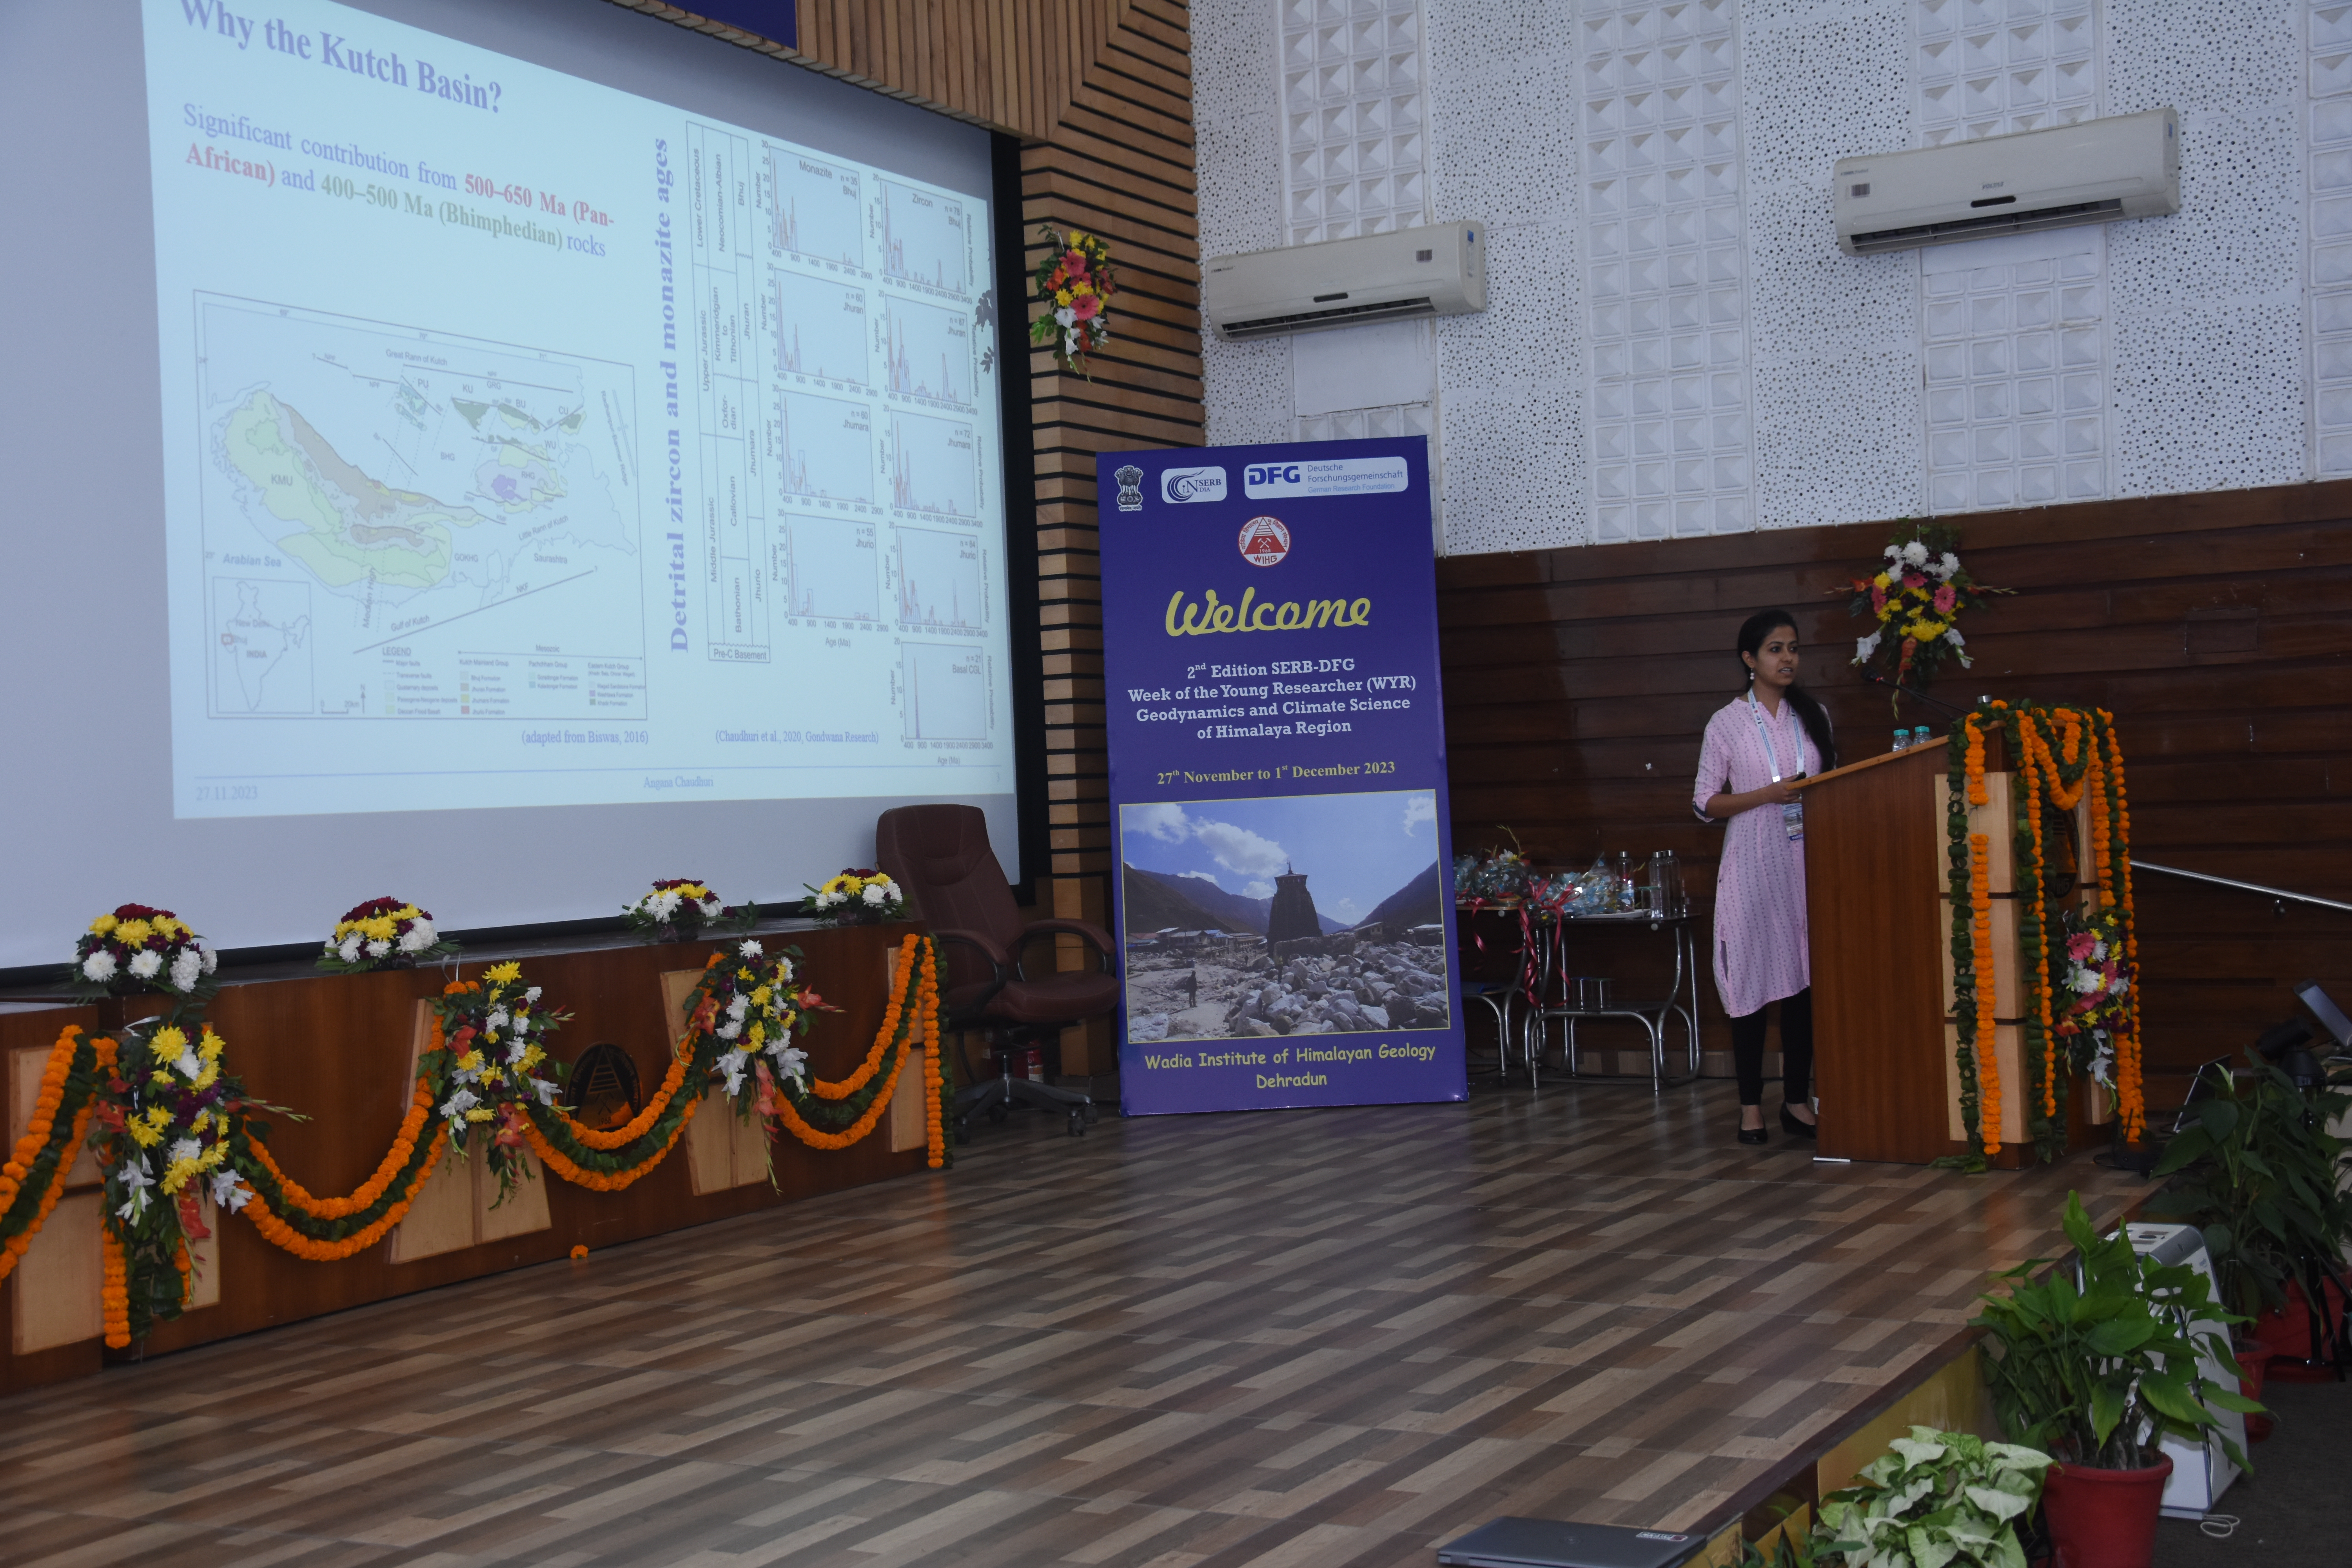 Presentation of Early Career Scientist Dr. Angana Chaudhuri